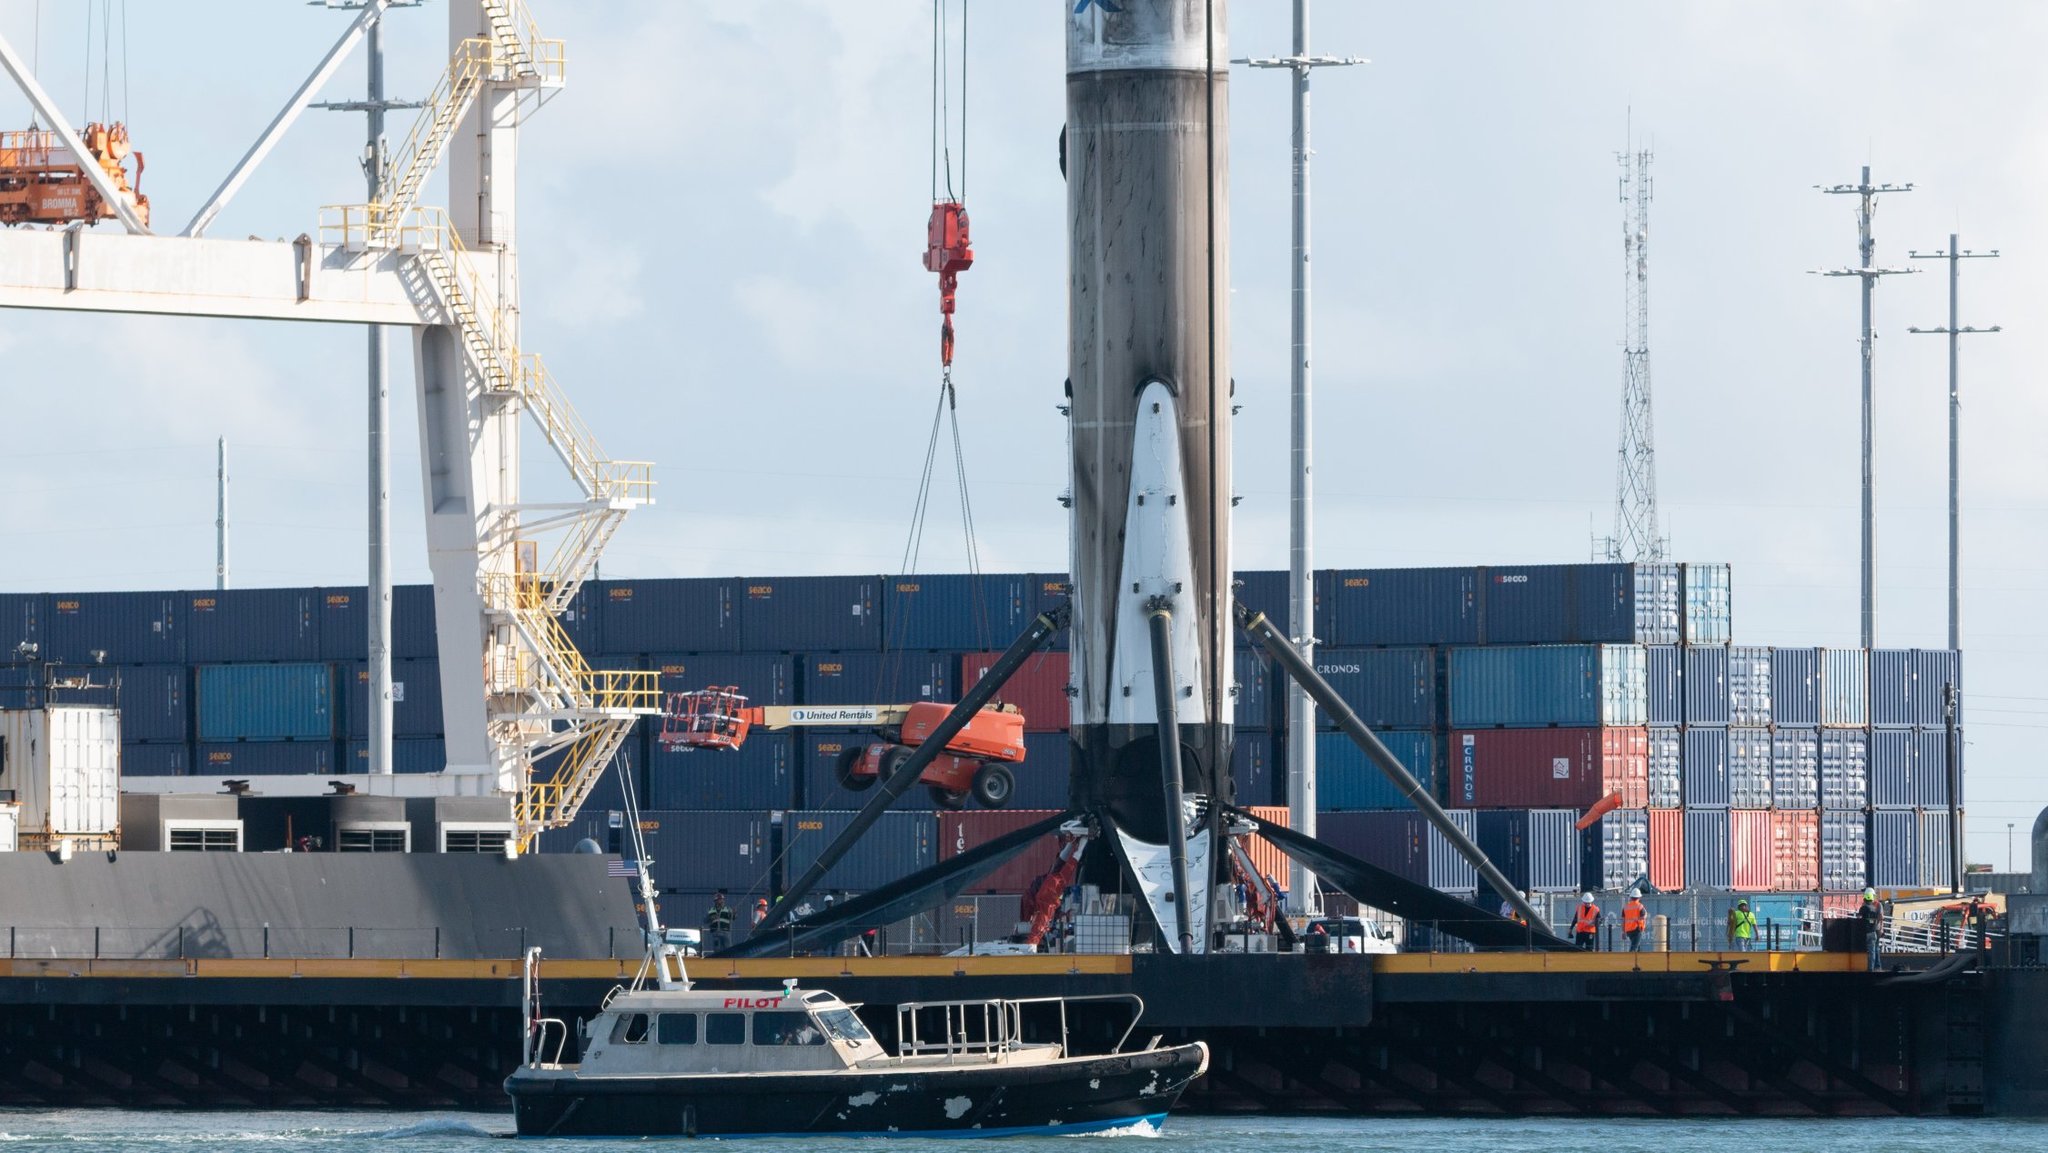 Photos of the arrival of the JRTI platform with the first stage of B1058.2 at Port Canaveral - Spacex, Falcon 9, Cape Canaveral, Cosmonautics, Step, Space, Video, Longpost